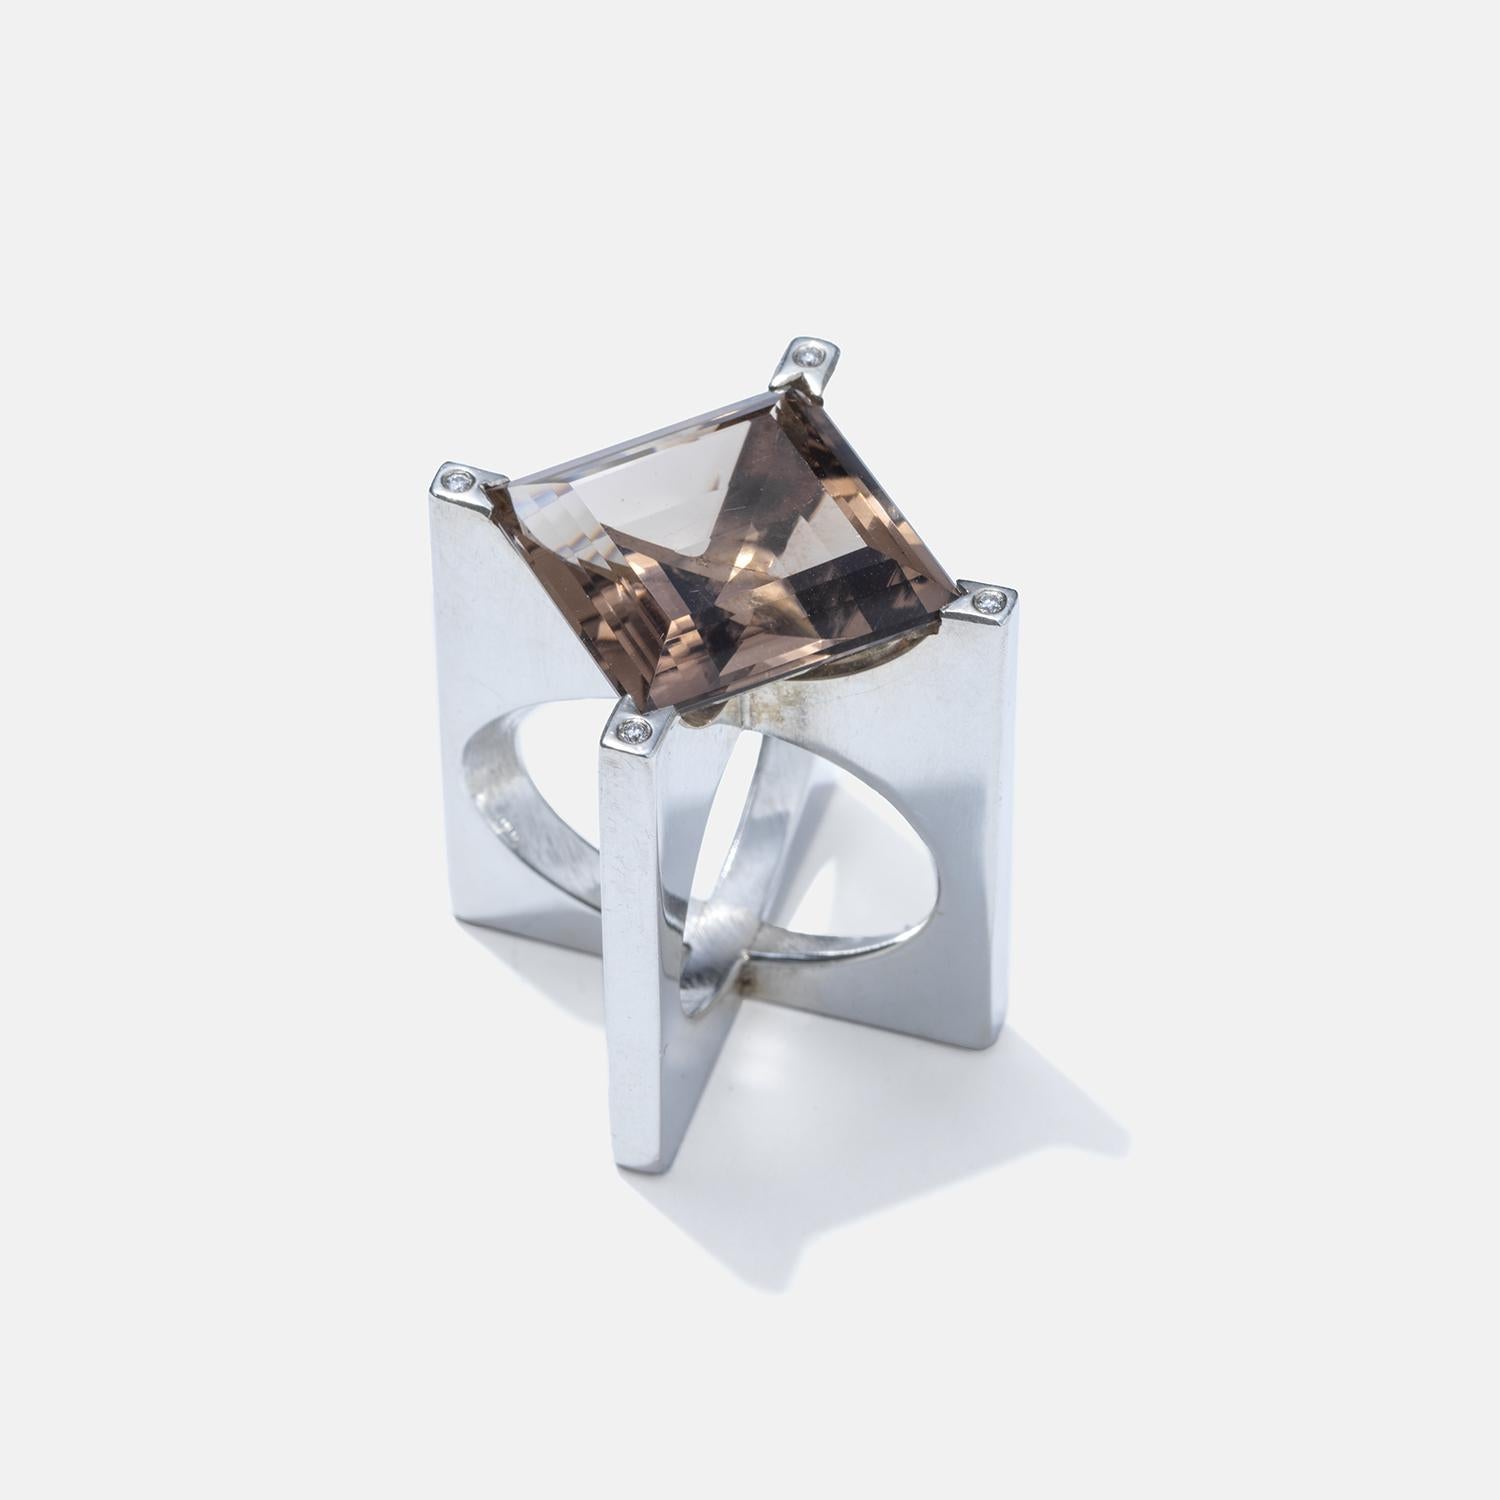 This ring features a bold, high-set design that elevates a large, square-cut smoky quartz at its center, showcasing a translucent brown colour. The silver band of the ring splits into four distinct, evenly spaced arms that support the high-set smoky